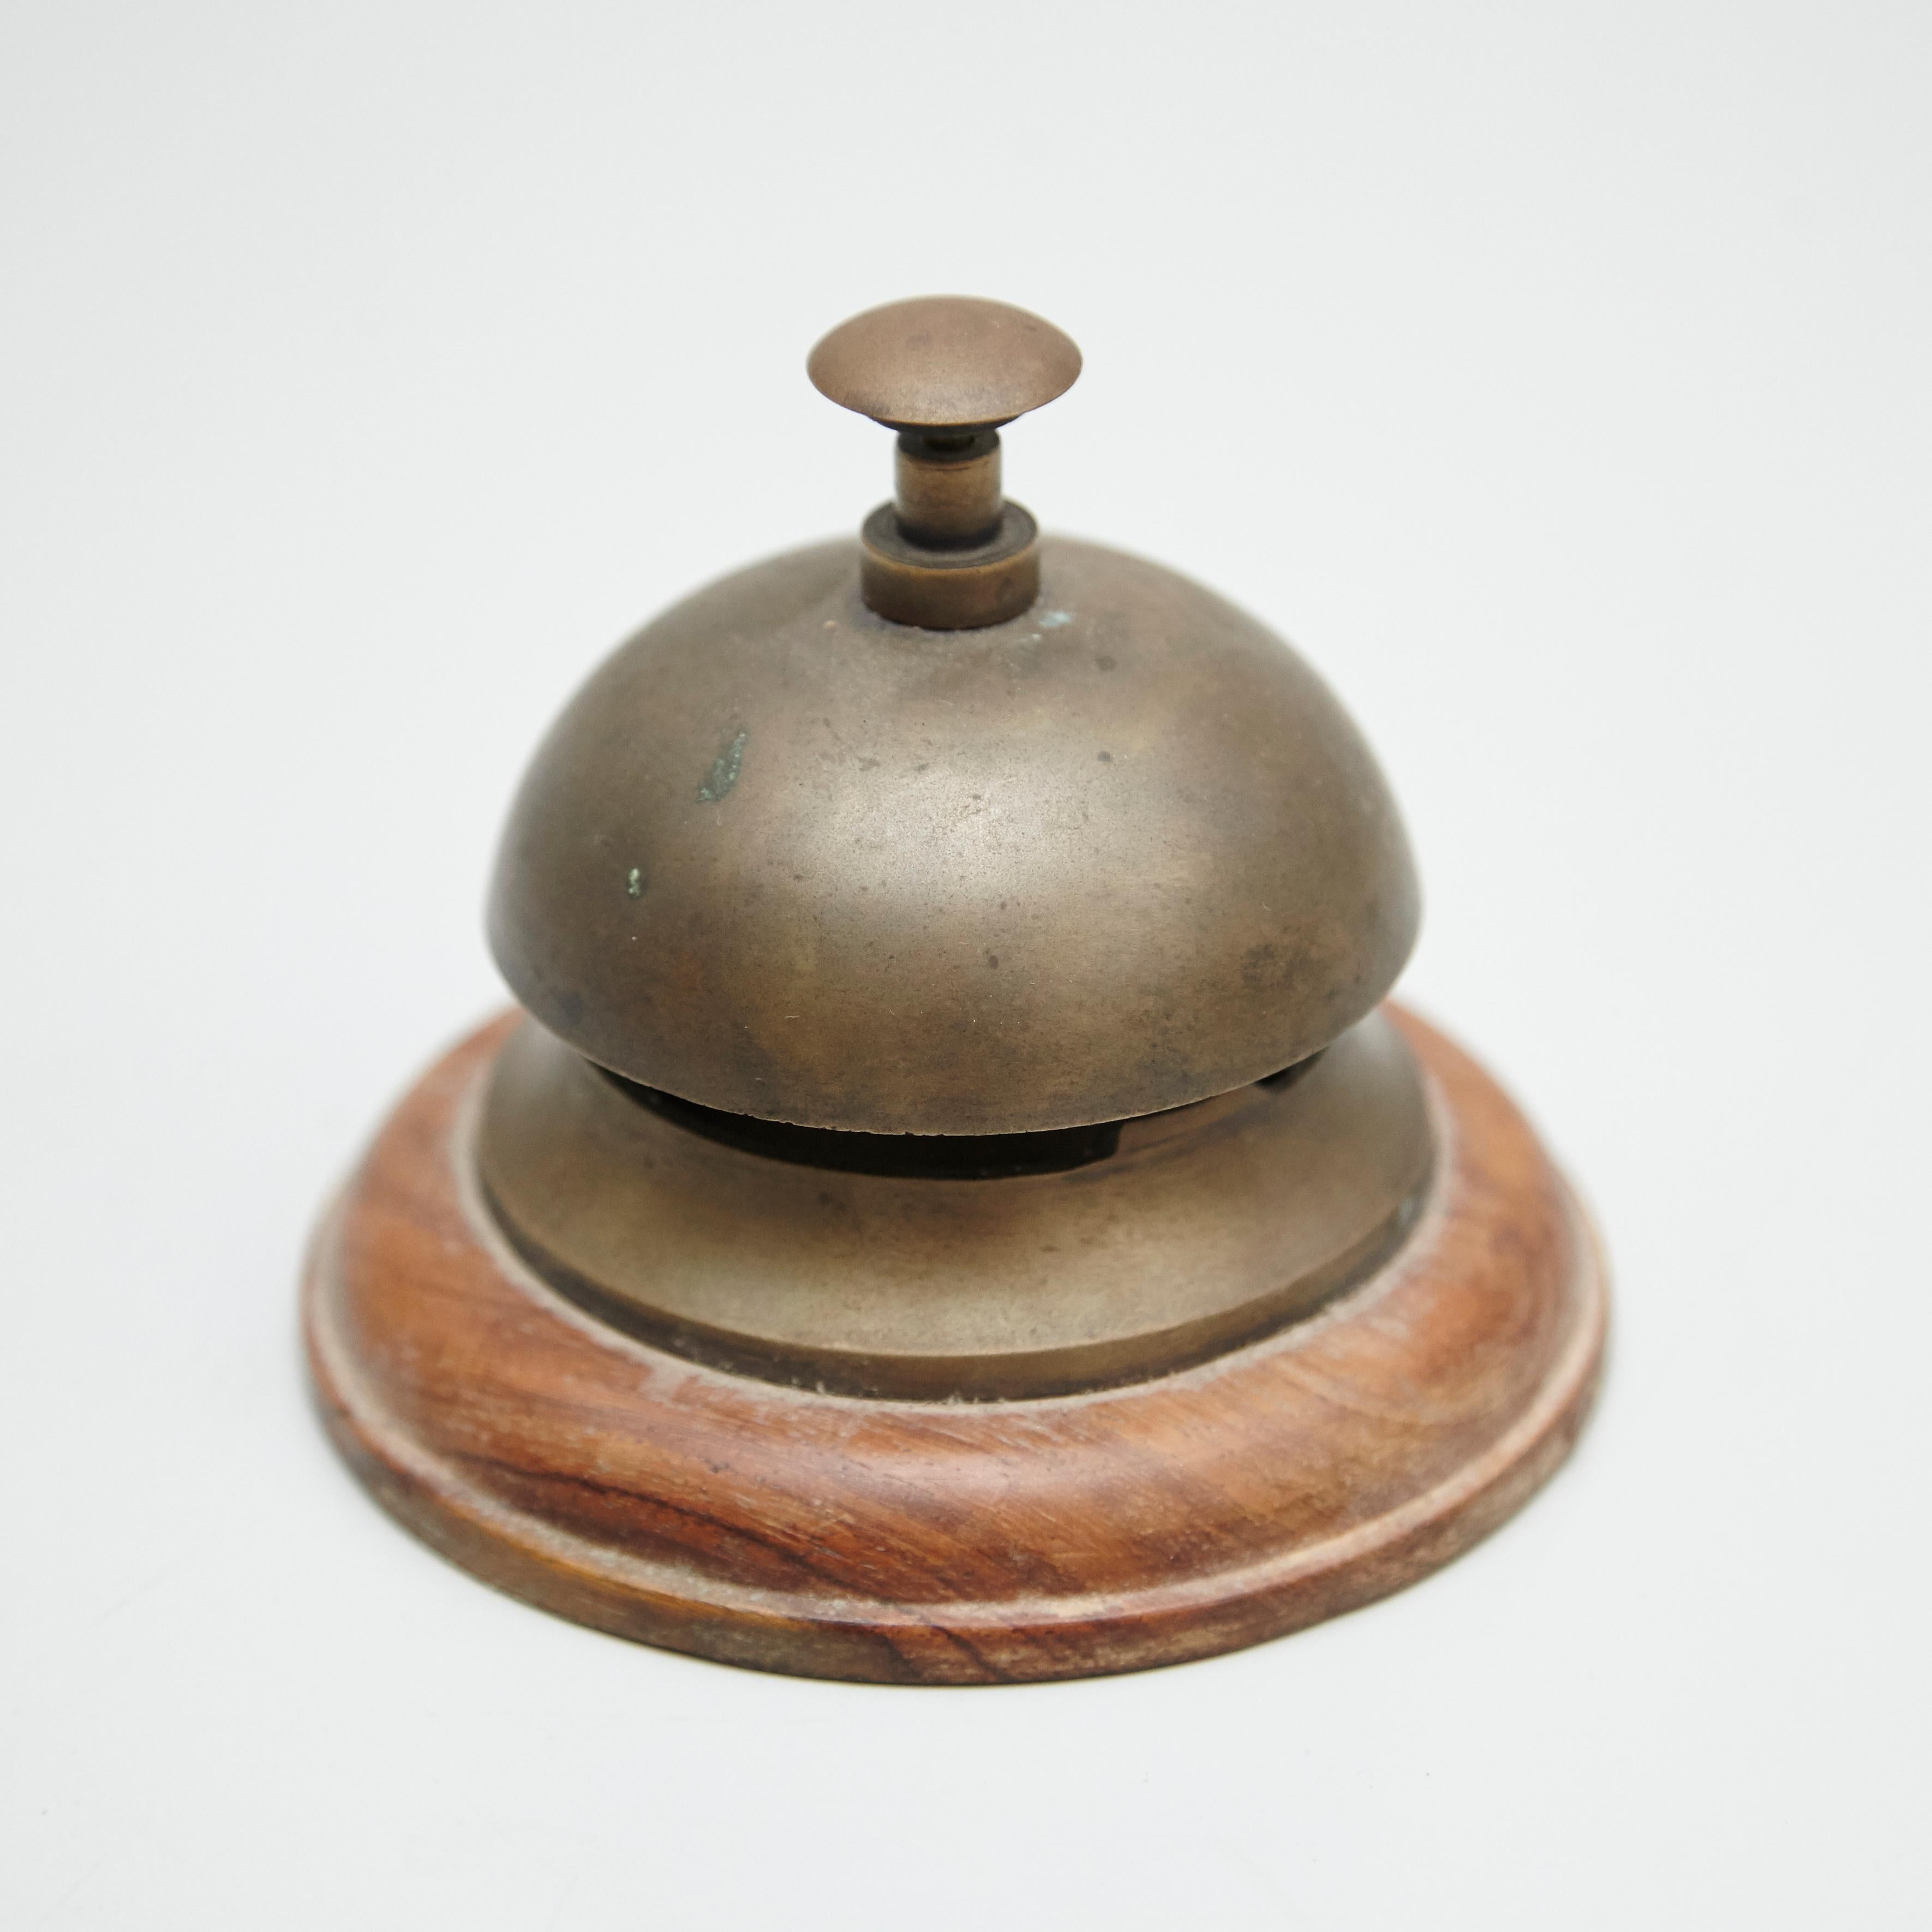 Antique early 20th century hotel bell
Brass and wood base.

circa 1920.

In original condition, with minor wear consistent of age and use.
 